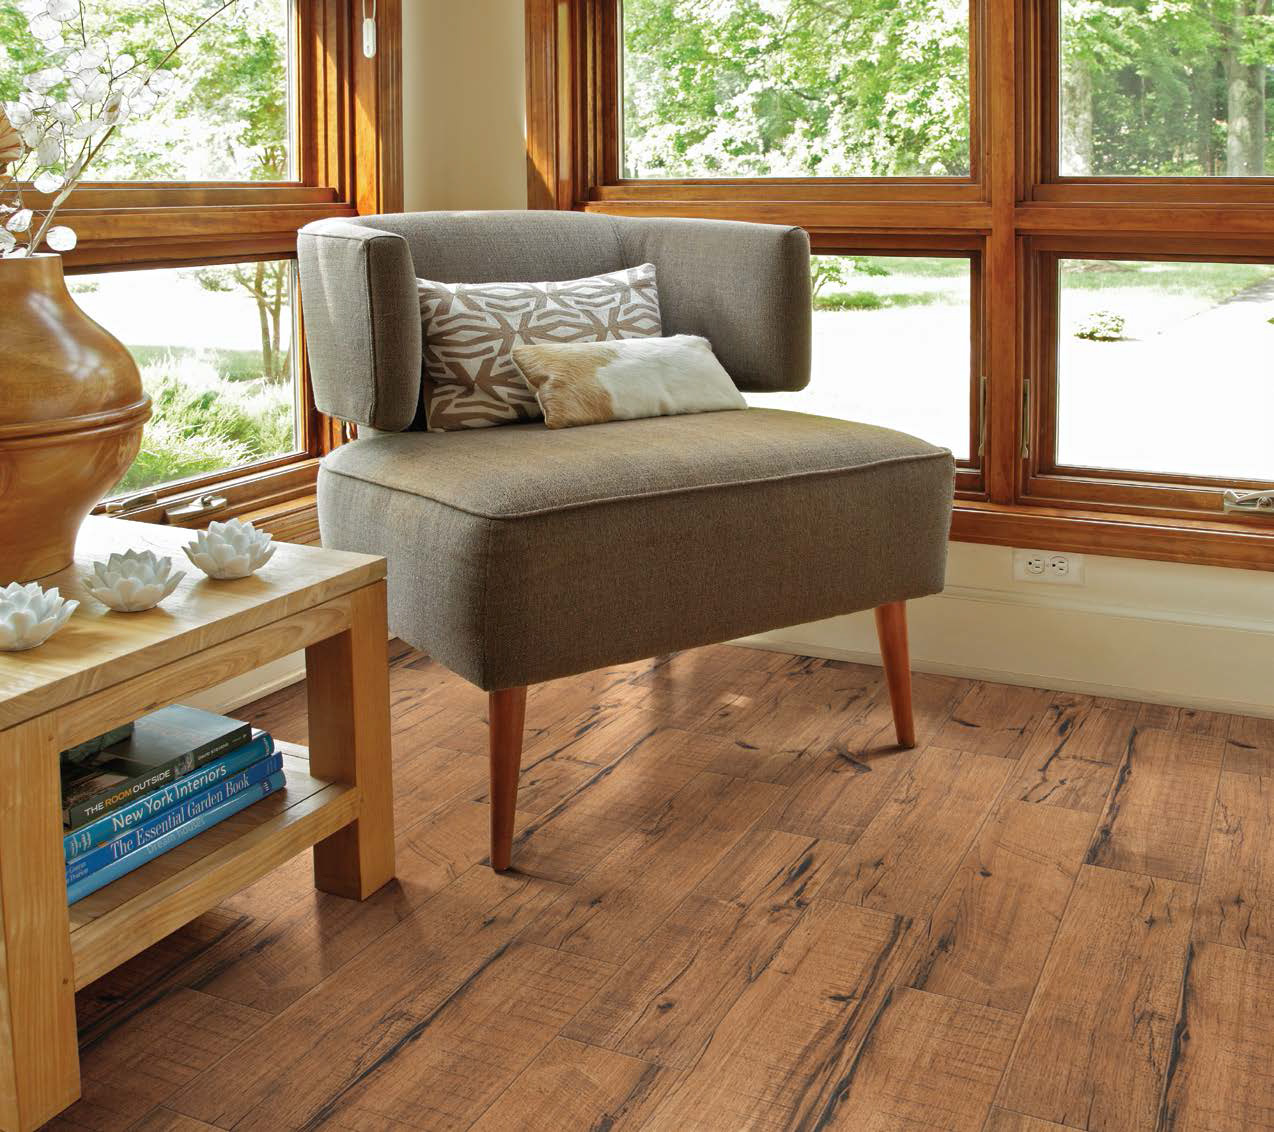 How to Select a Thickness for Your Luxury Vinyl Plank Flooring